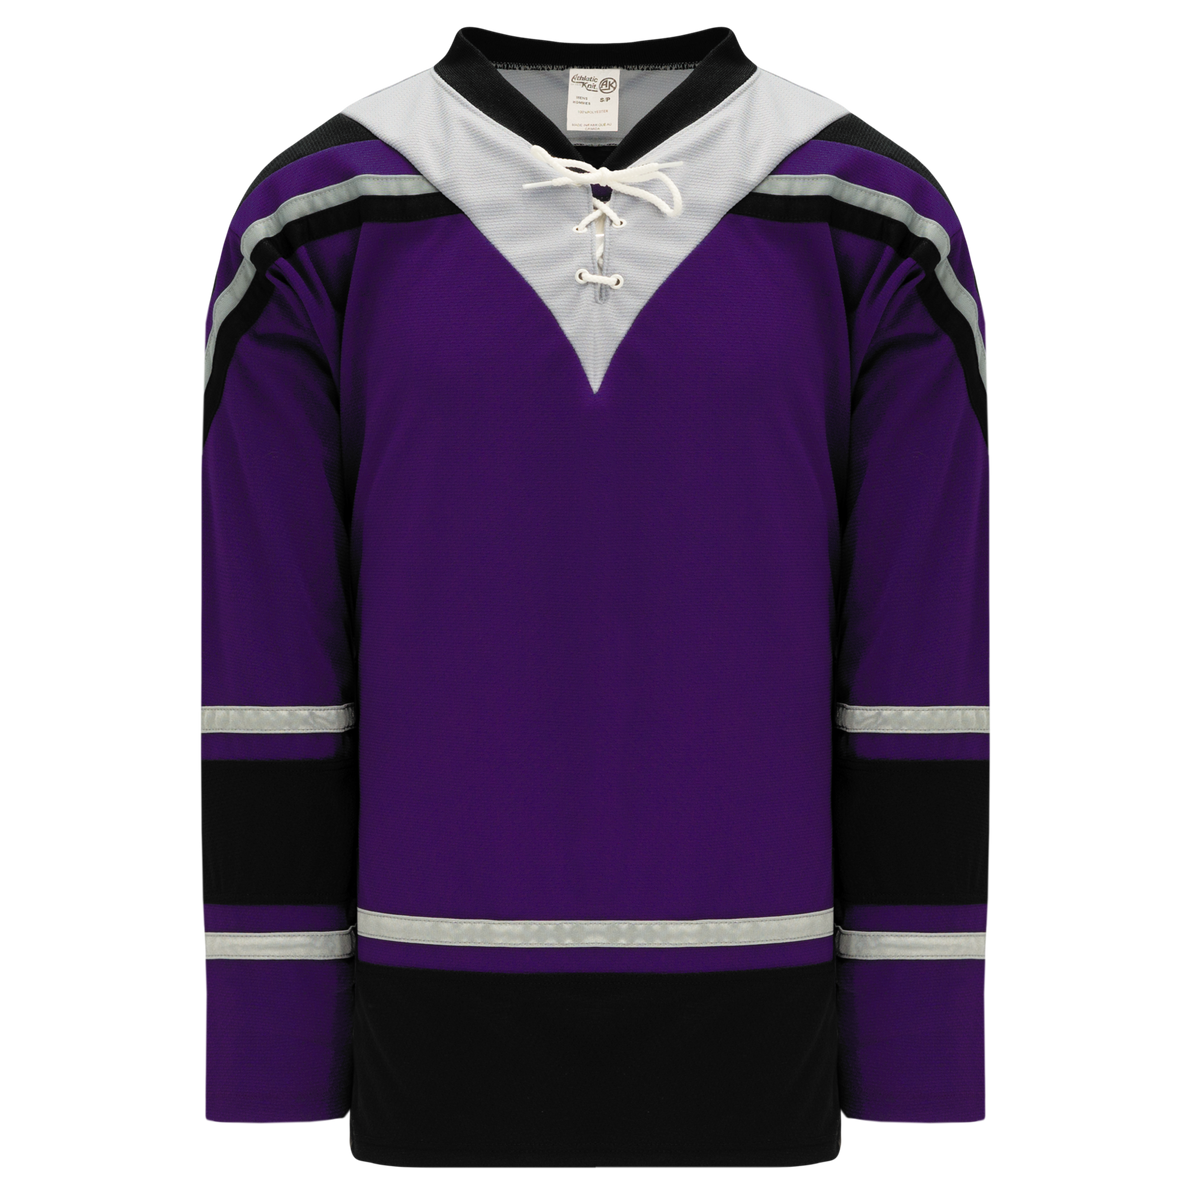 Athletic Knit (AK) H550BKY-LAS751BK Pro Series - Youth Knitted Vintage Los Angeles Kings Purple Hockey Jersey X-Large